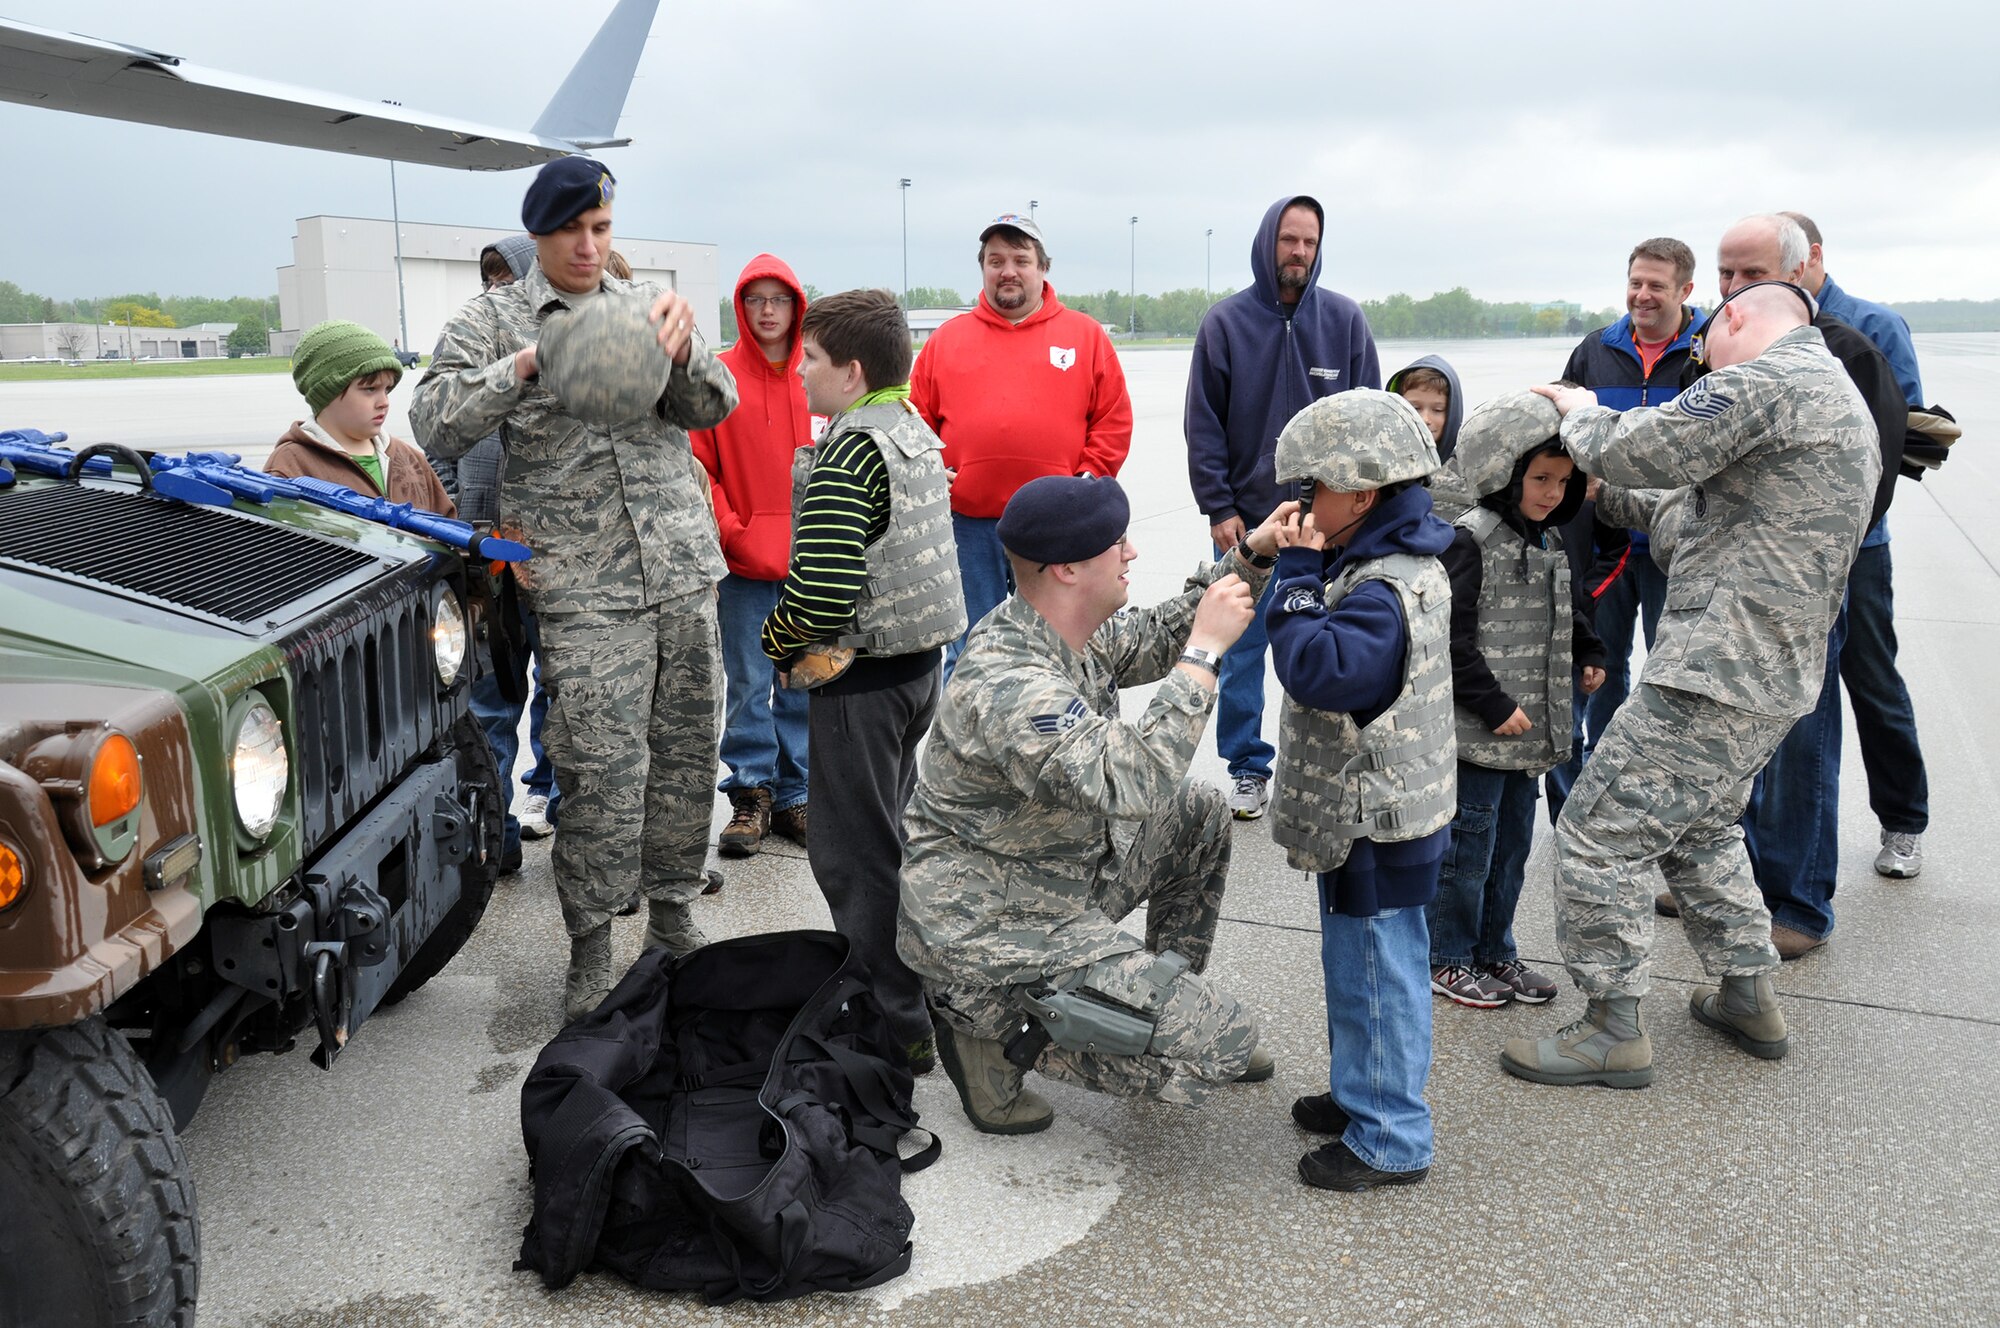 WRIGHT-PATTERSON AIR FORCE BASE, Ohio - Staff Sgt. Gustavo Medina, Senior Airman Mark Murphy and Tech. Sgt. Steve Wright, 445th Security Forces Squadron, help Scouts put on security forces gear as they prepare to participate in a scenario during Scouts Day May 17. More than 50 Scouts and their adult leaders from the local area enjoyed a morning of activities on the 445th fligthline. Activities included a tour of a C-17 Globemaster III, demonstrations by security forces and the 445th Aeromedical Evacuation Squadron, and tour of a base fire truck. (U.S. Air Force photo/Lt. Col. Denise Kerr)